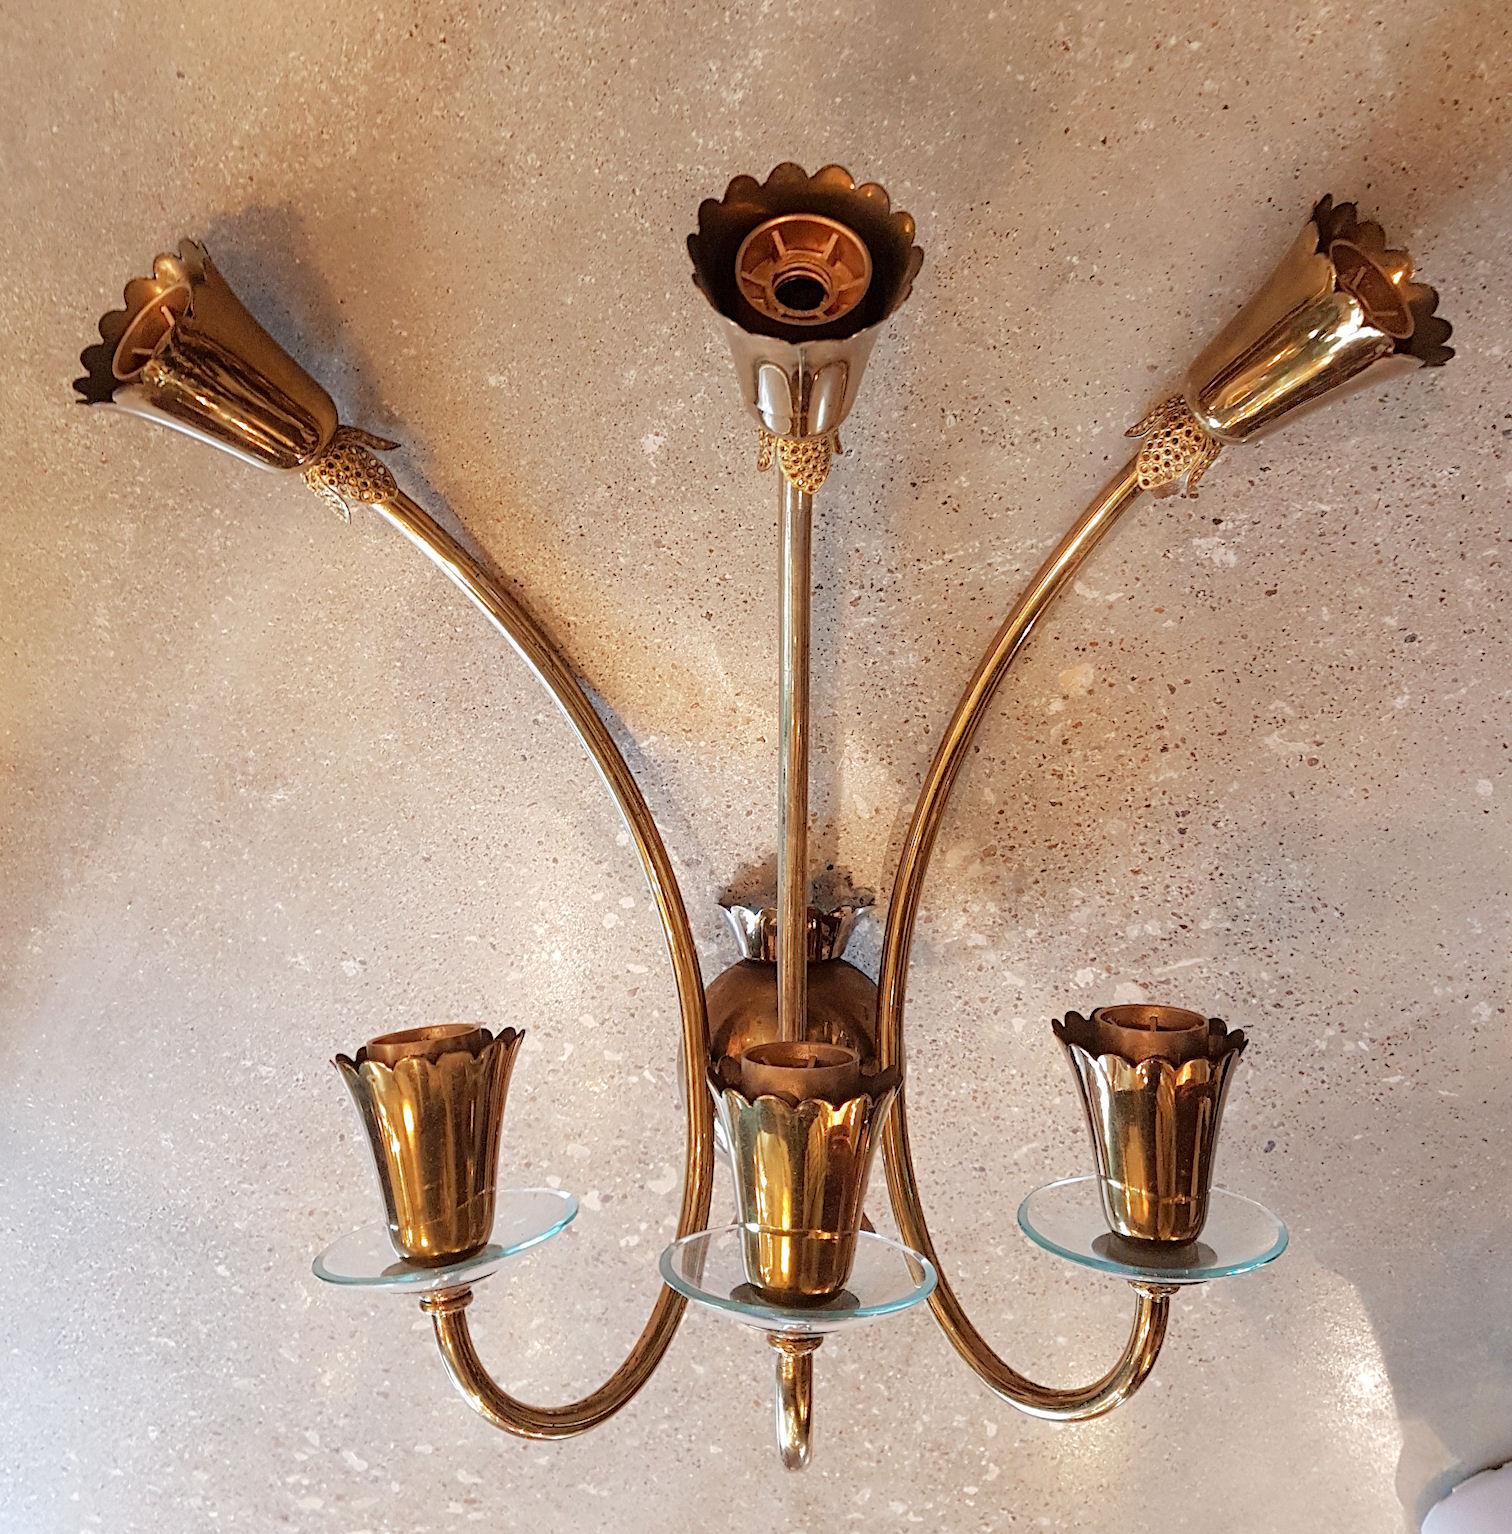 Pair of 6 lights Stilnovo style, Mid-Century Modern brass with clear glass Italian wall sconces.
Pure Stilnovo Italian midcentury style, elegant and simple.
They have been rewired, for candelabra base bulbs.